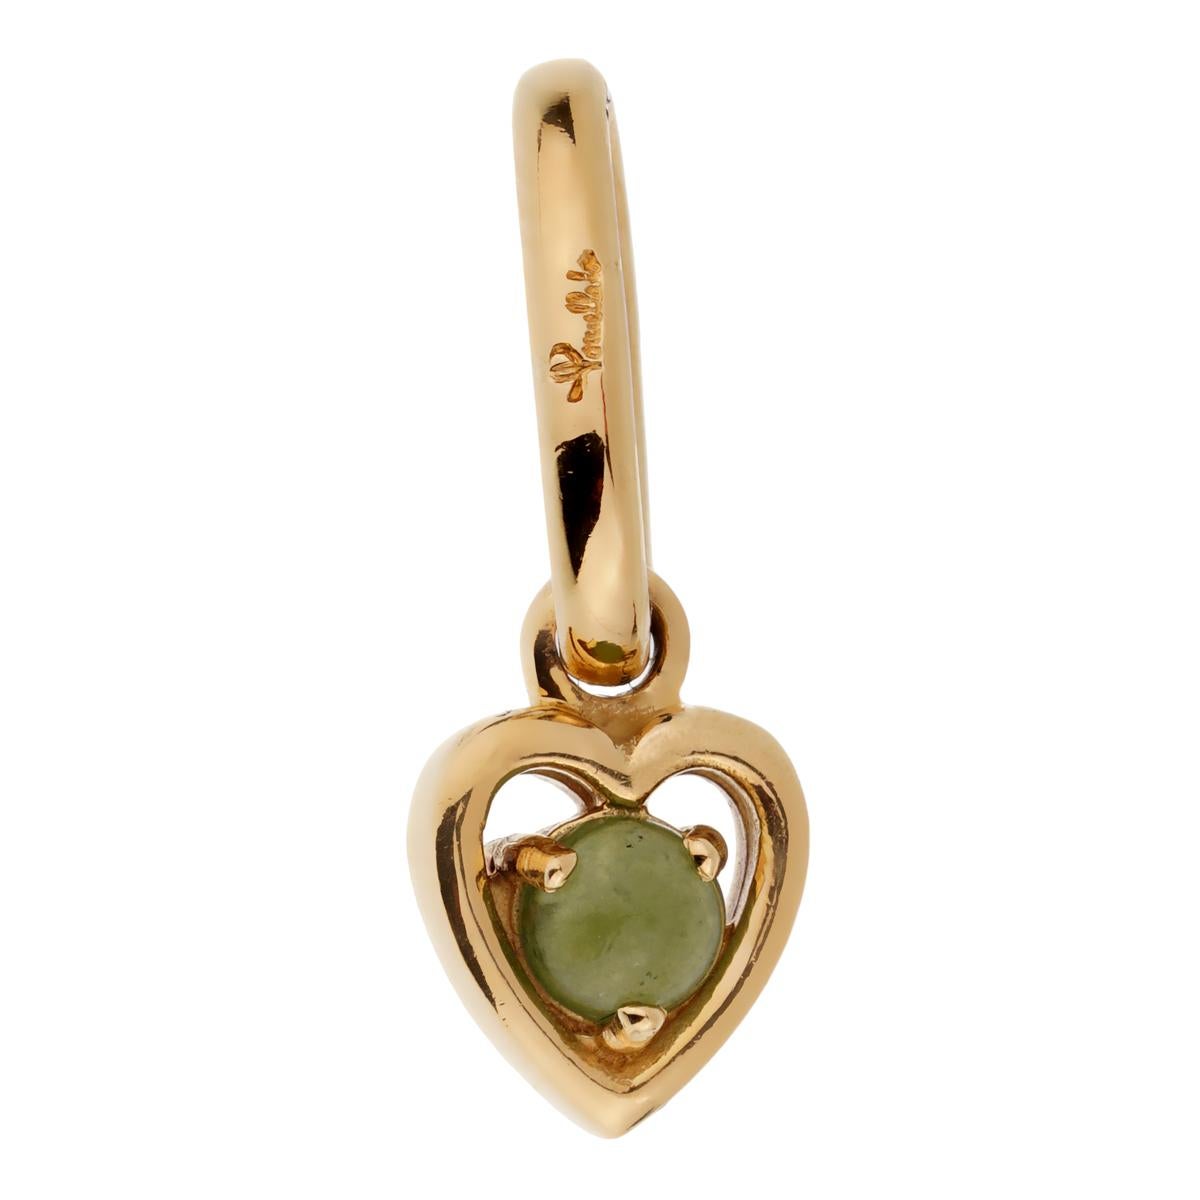 A chic brand new Pomellato charm pendant featuring a .35ct Green Chalcedony set in 18k yellow gold. 

Sku: 2300